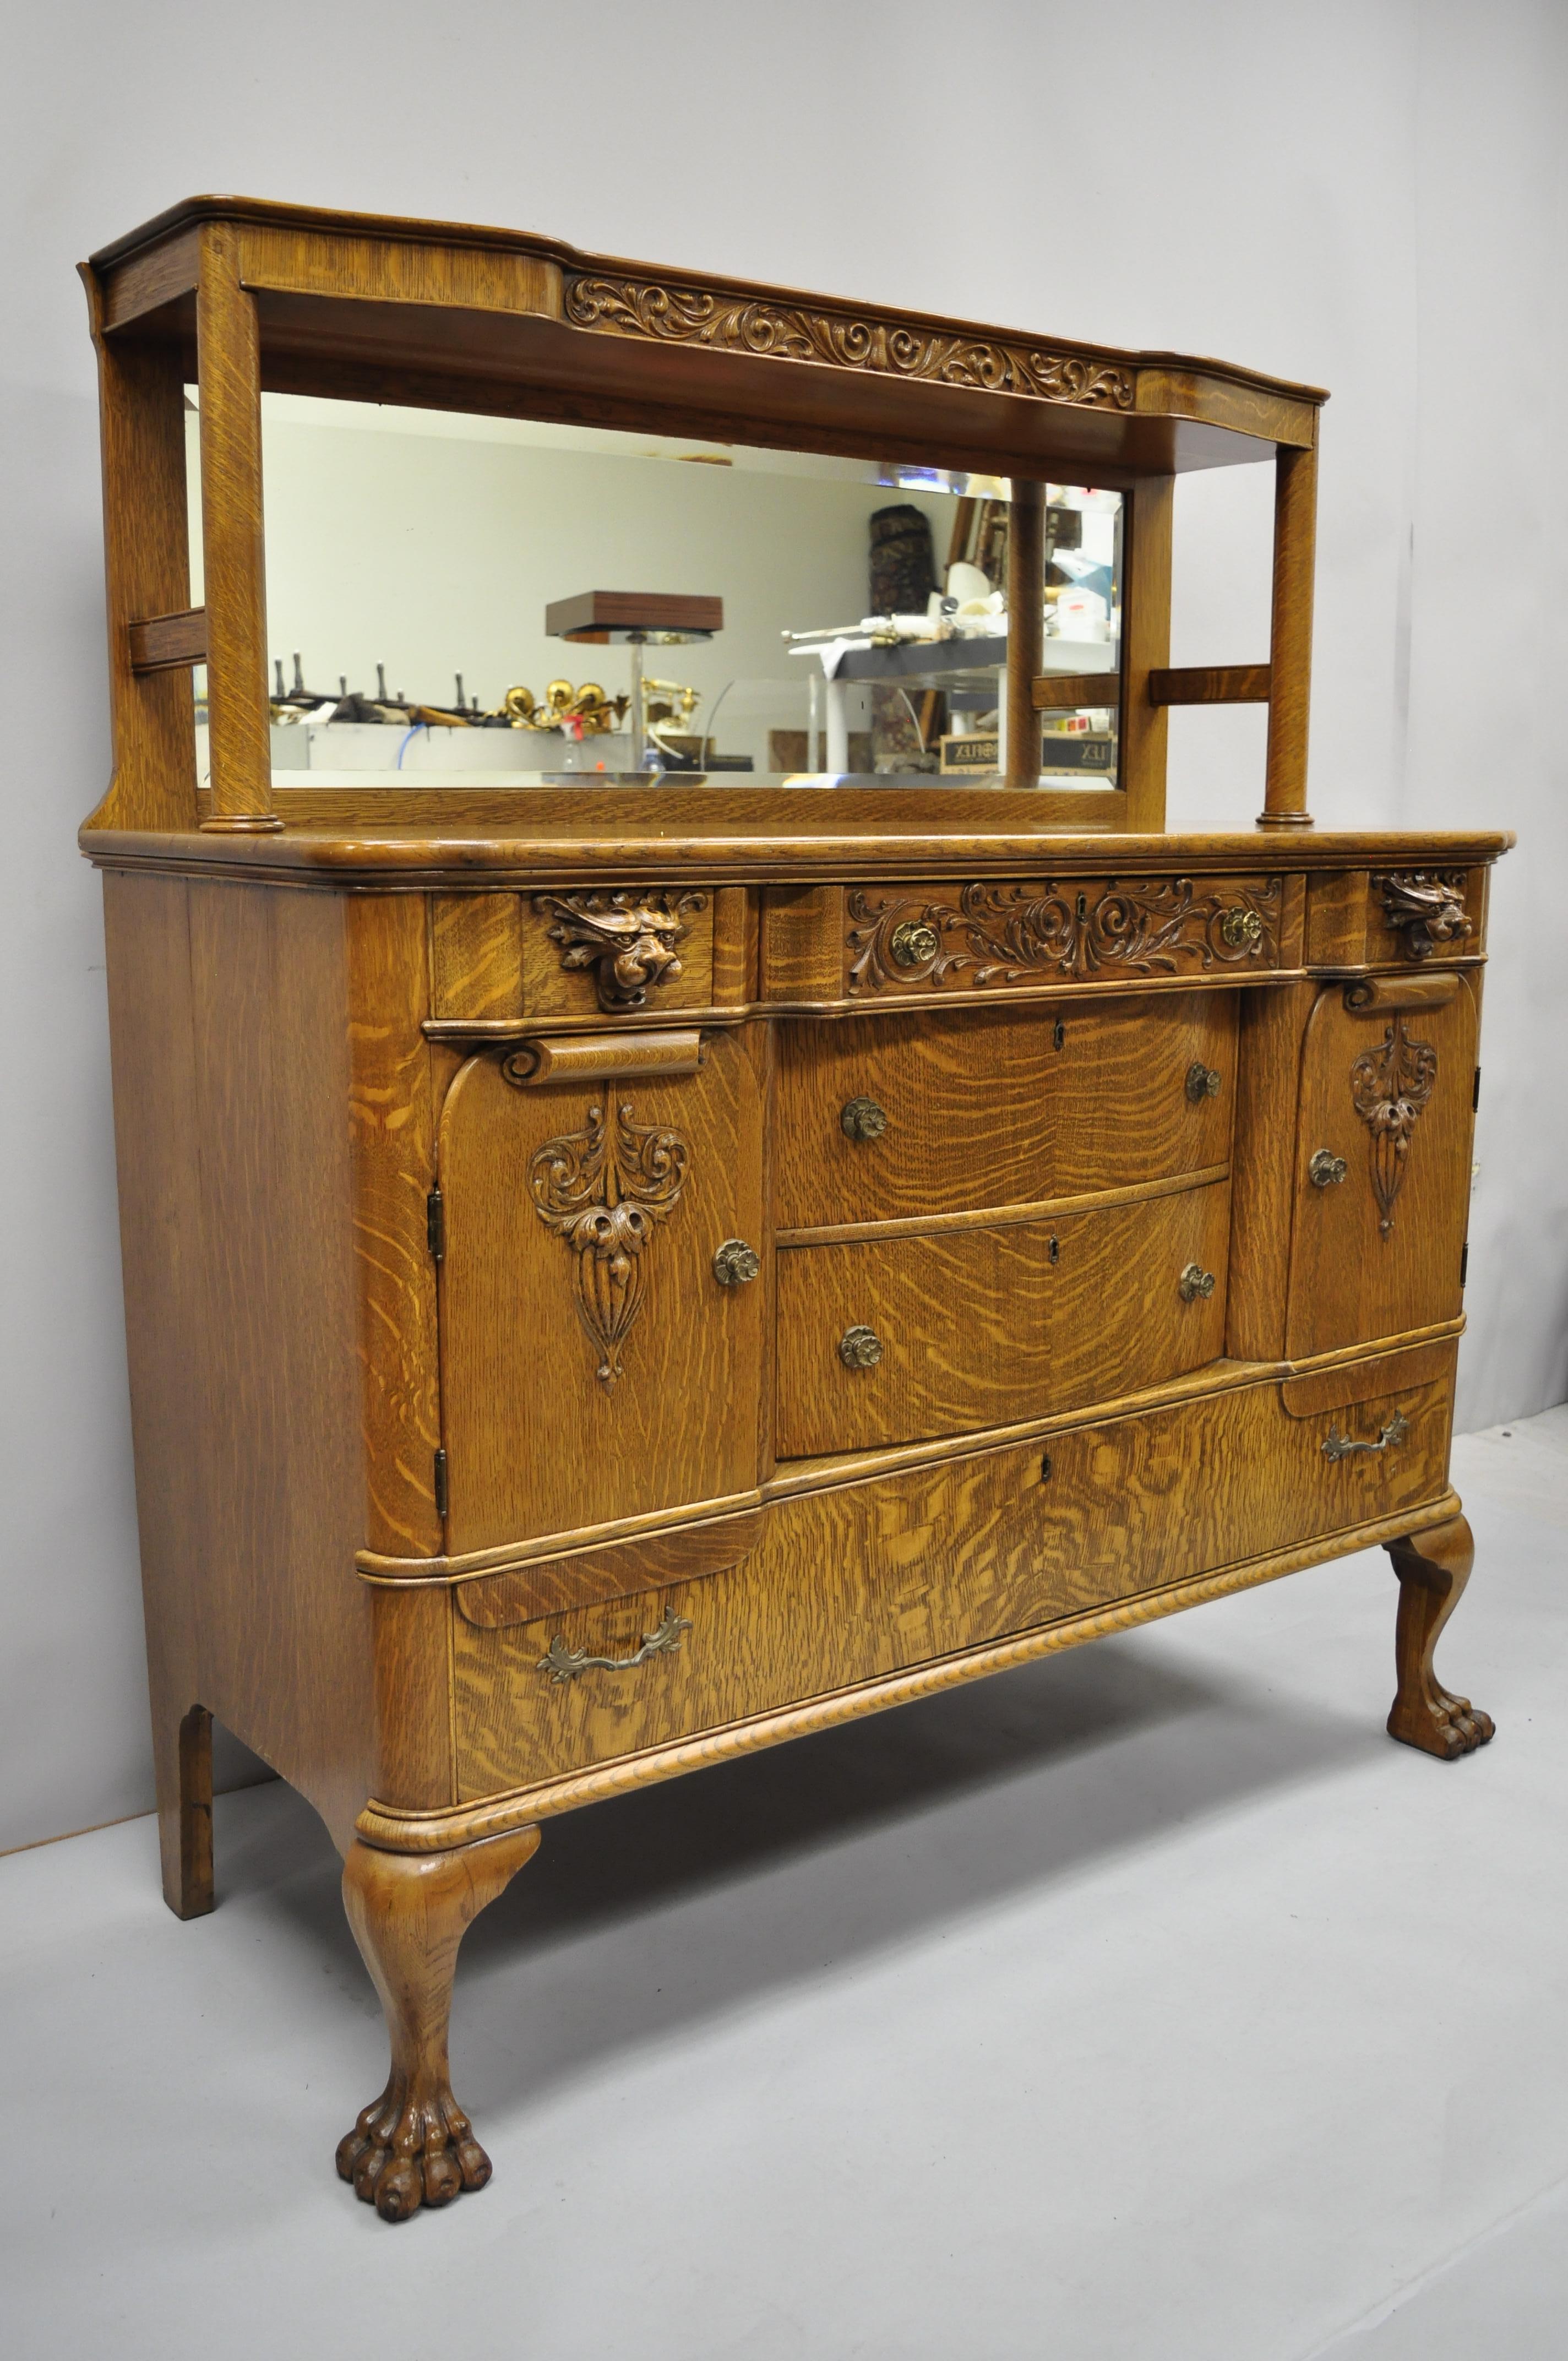 Antique golden tiger oak Victorian paw foot sideboard buffet lions & mirror back. Item features carved paw feet, lion carved pulls, beautiful tiger oakwood grain, 2 swing doors, beveled glass mirror, 6 drawers, very nice antique item, late 19th